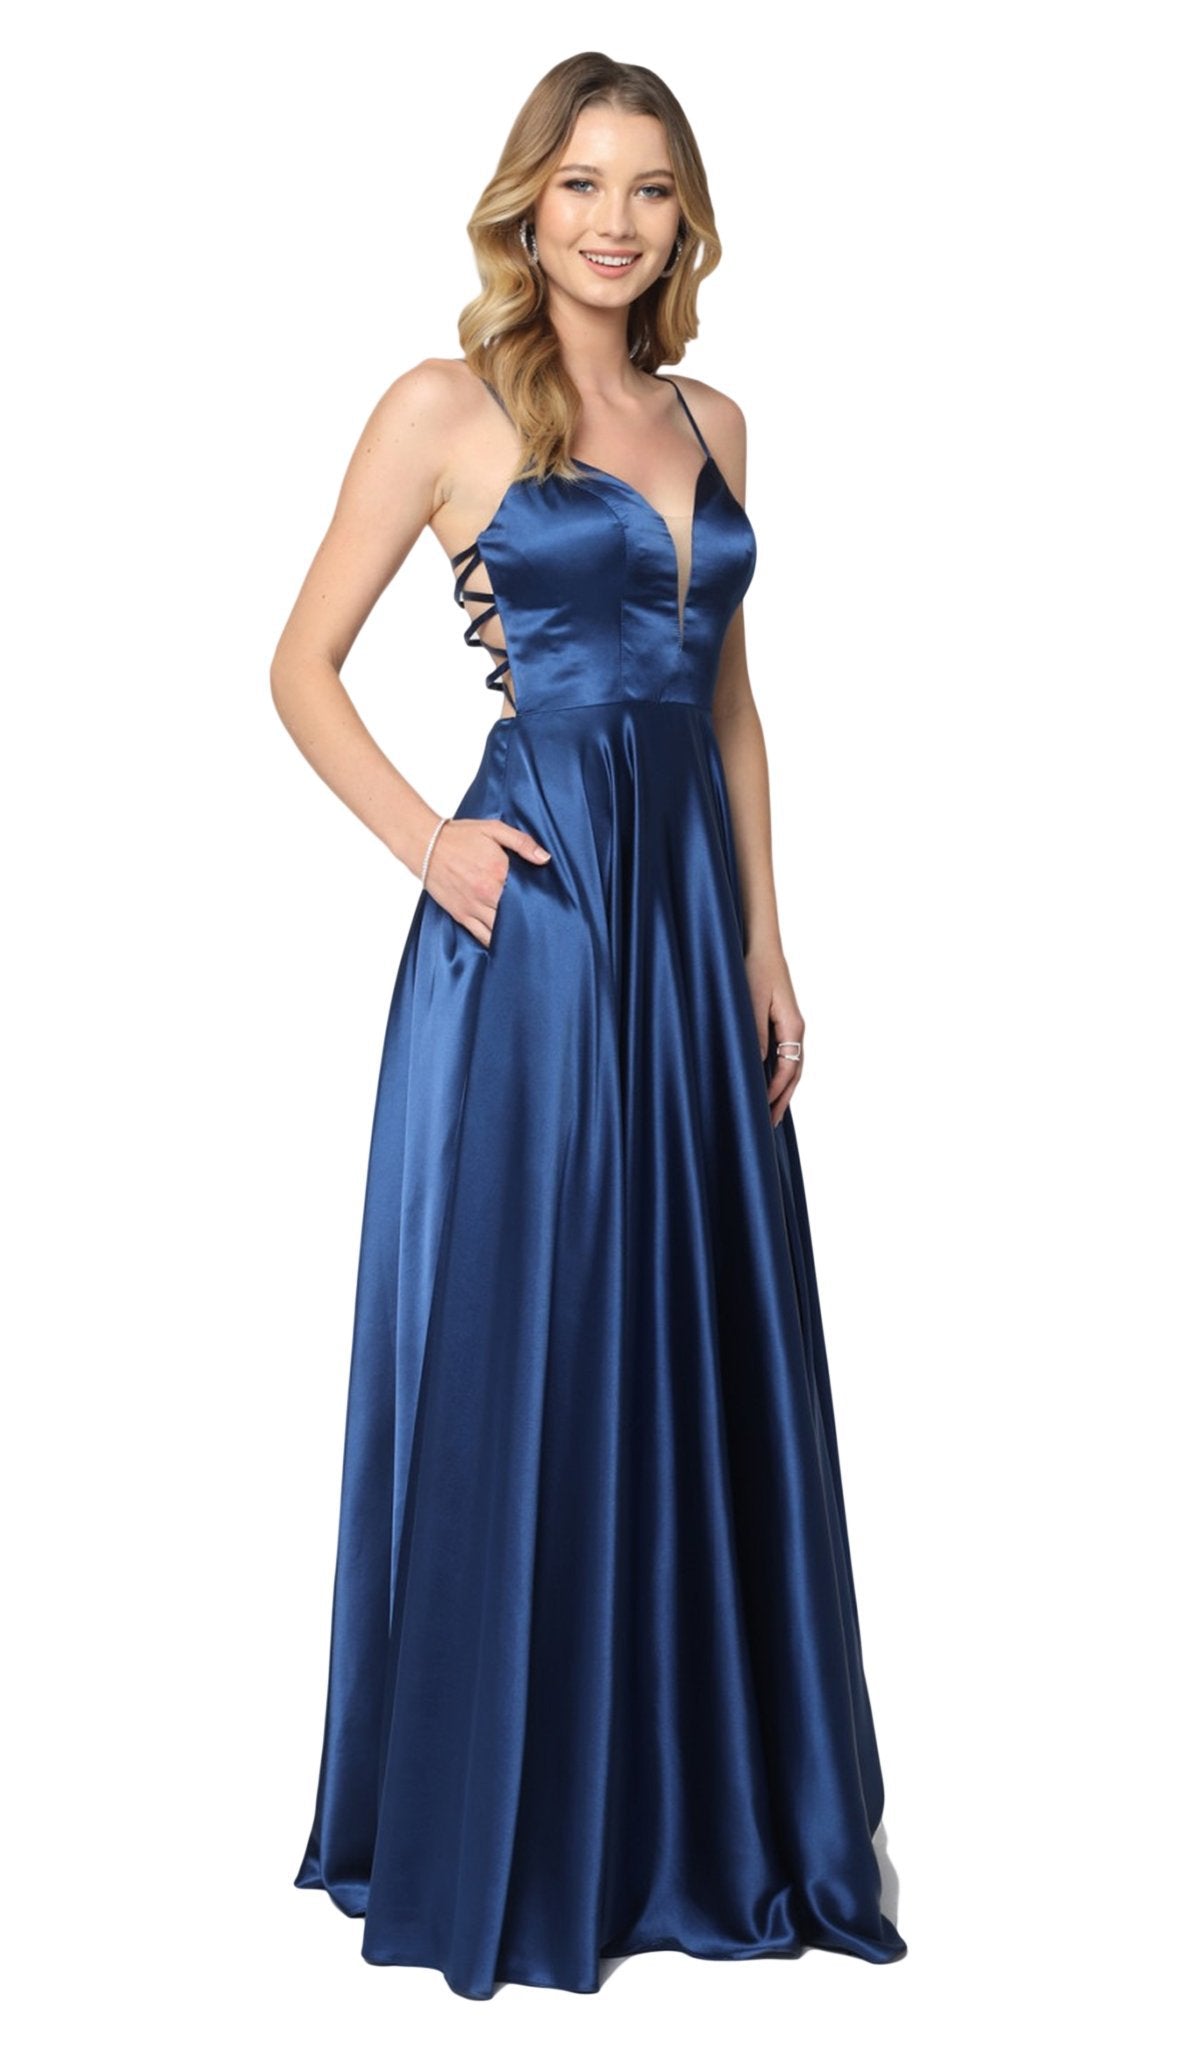 Nox Anabel - A180 Deep V-neck A-line Dress With Strappy Back Special Occasion Dress XS / Navy